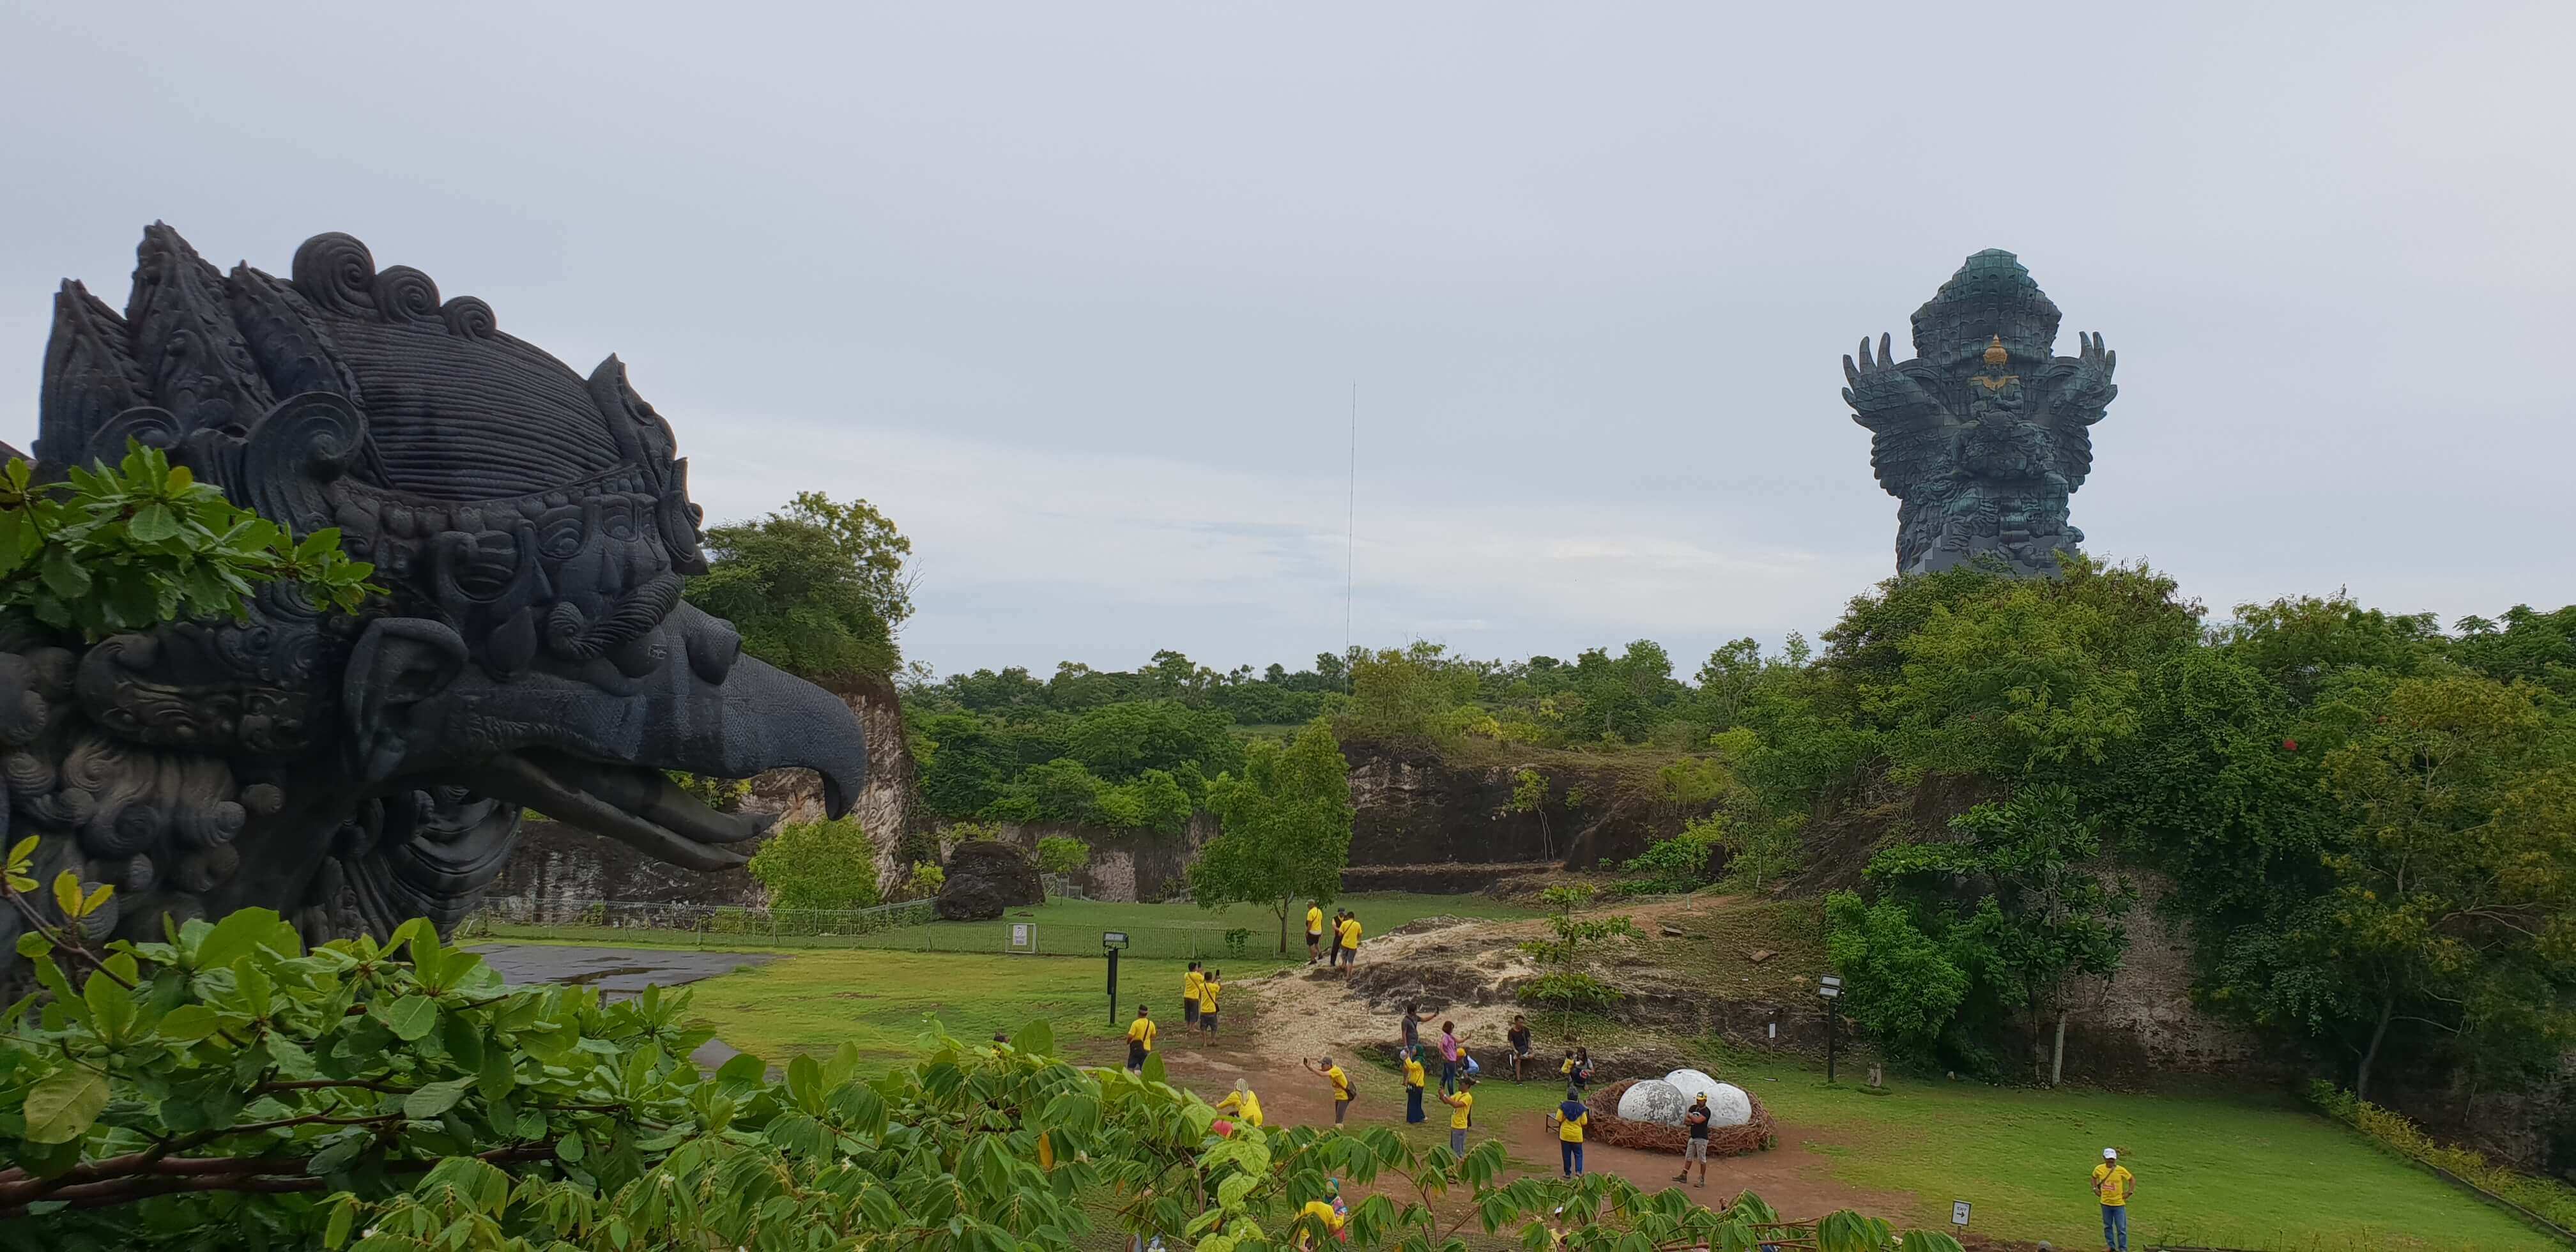 Huge statues in a single frame at the GWK park